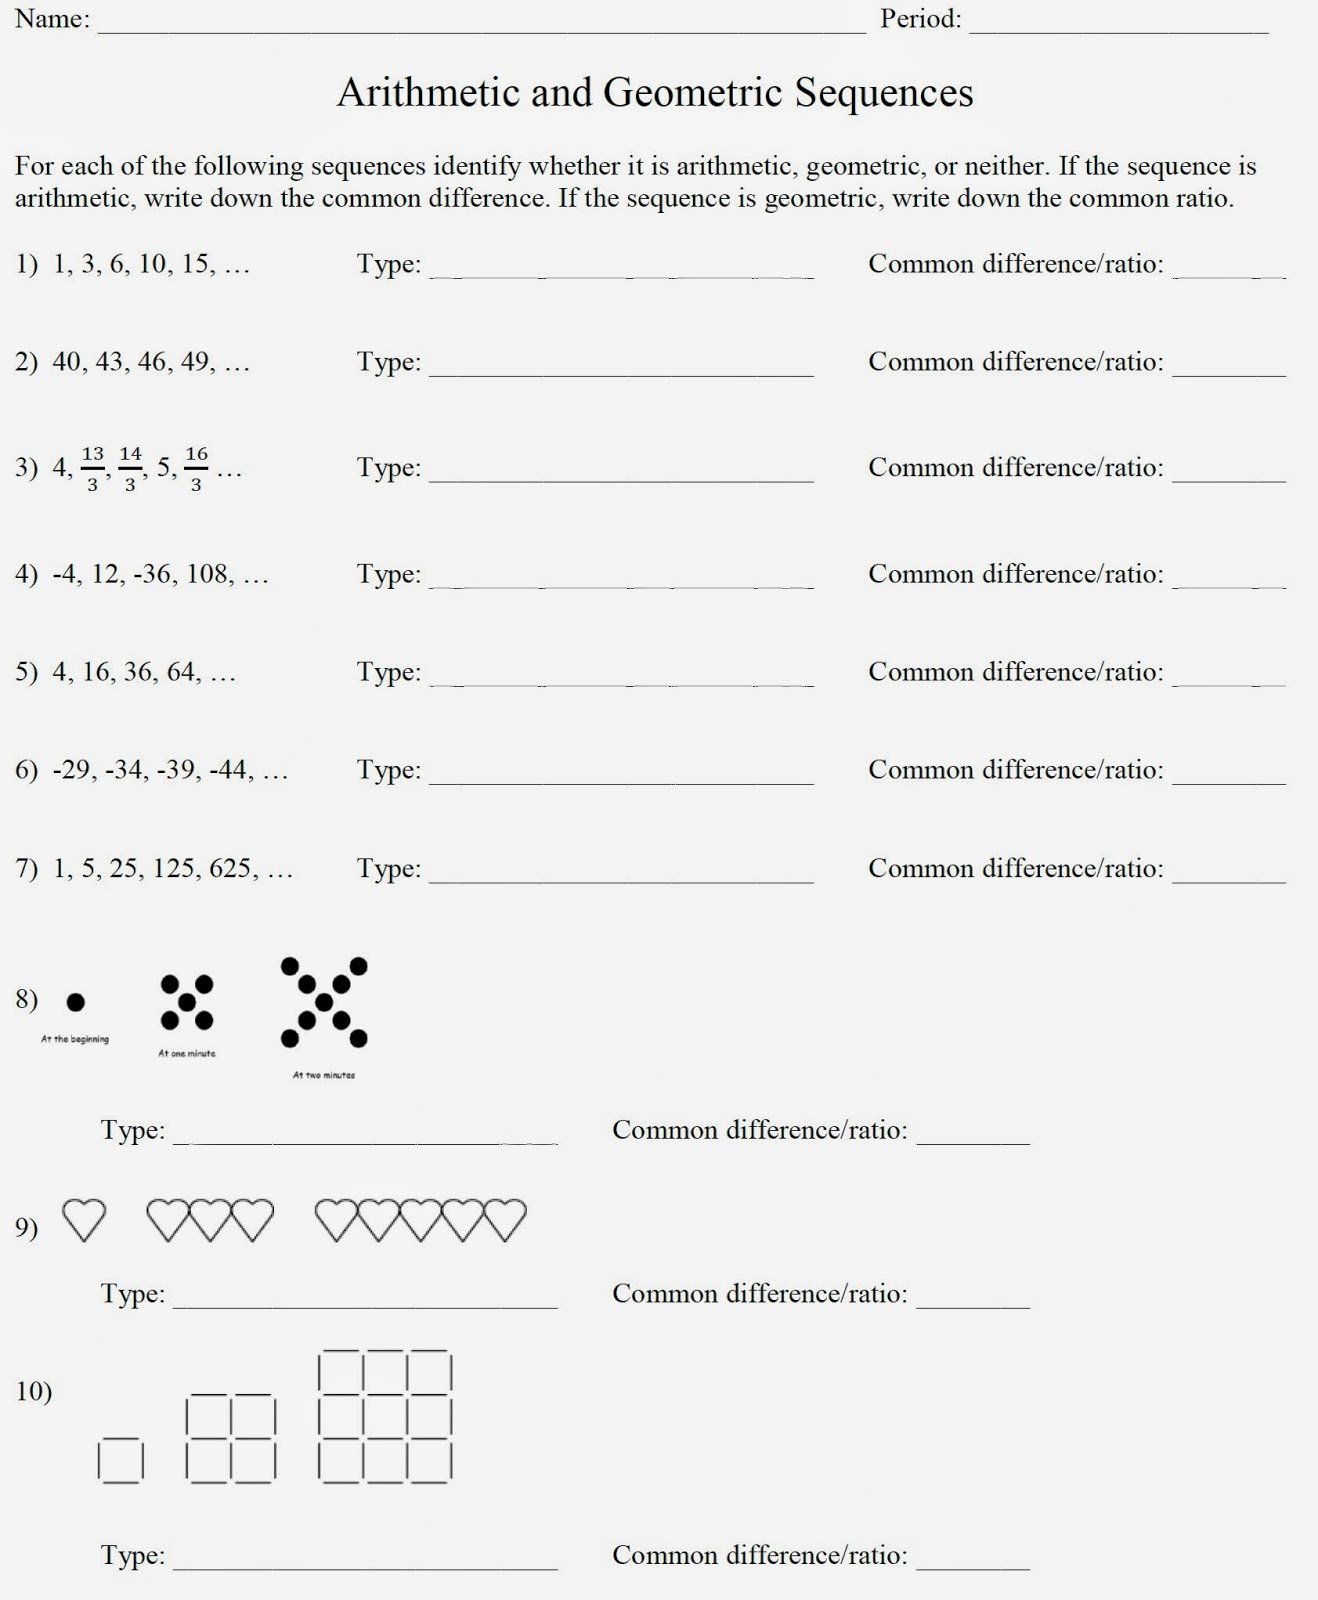 Geometric Sequence and Series Worksheet Best Of Mr Matt S Math Classes assignment Arithmetic and